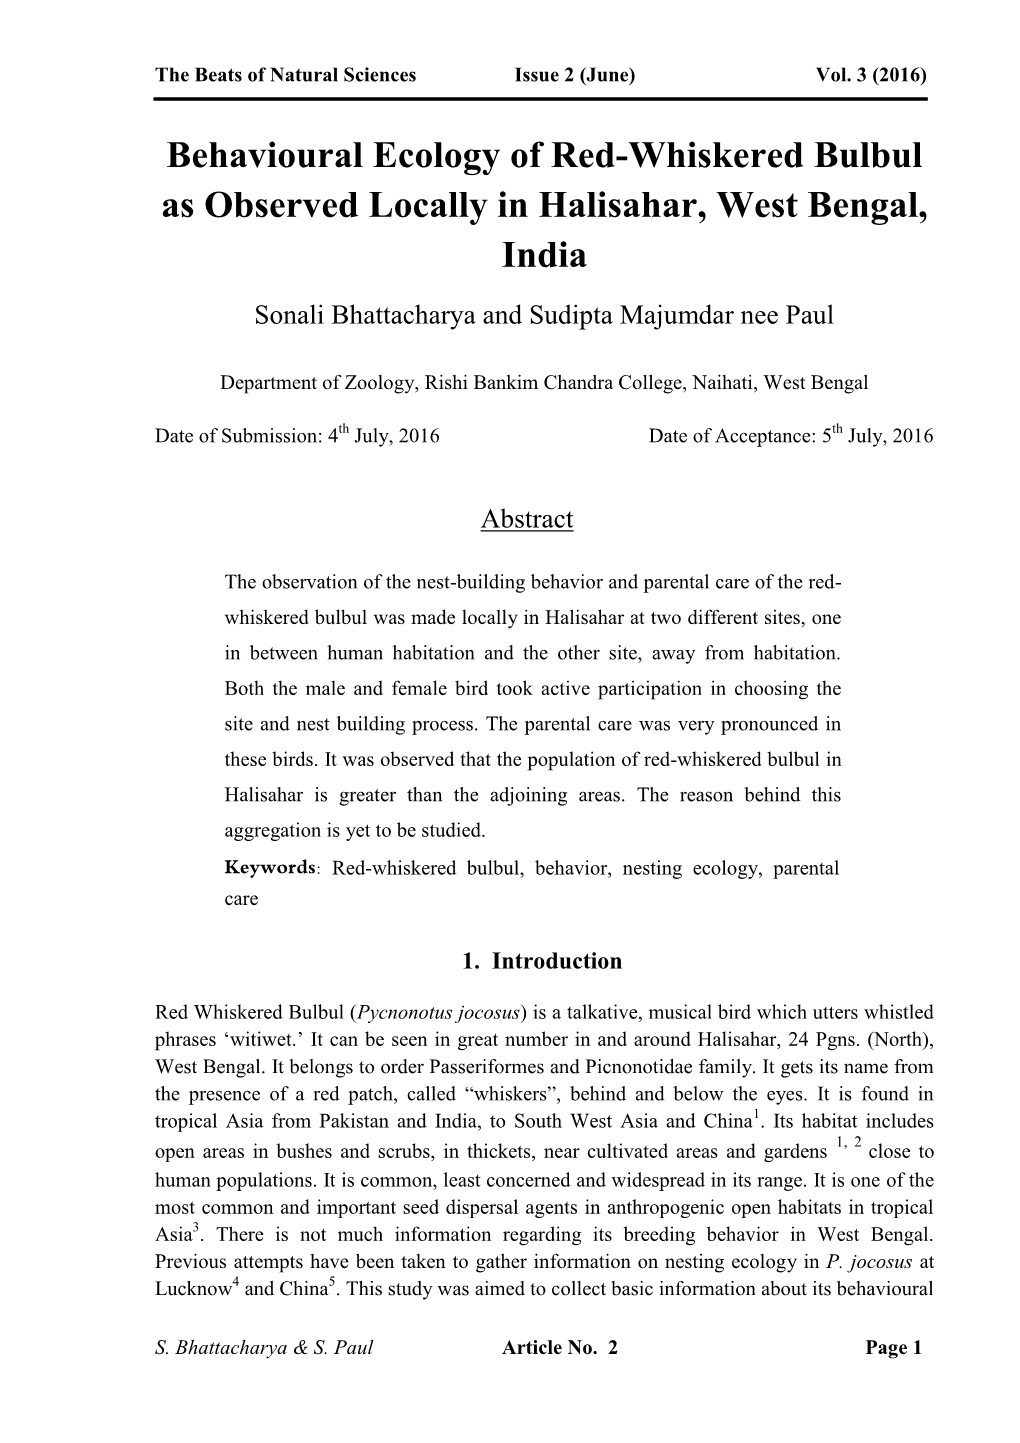 Behavioural Ecology of Red-Whiskered Bulbul As Observed Locally in Halisahar, West Bengal, India Sonali Bhattacharya and Sudipta Majumdar Nee Paul